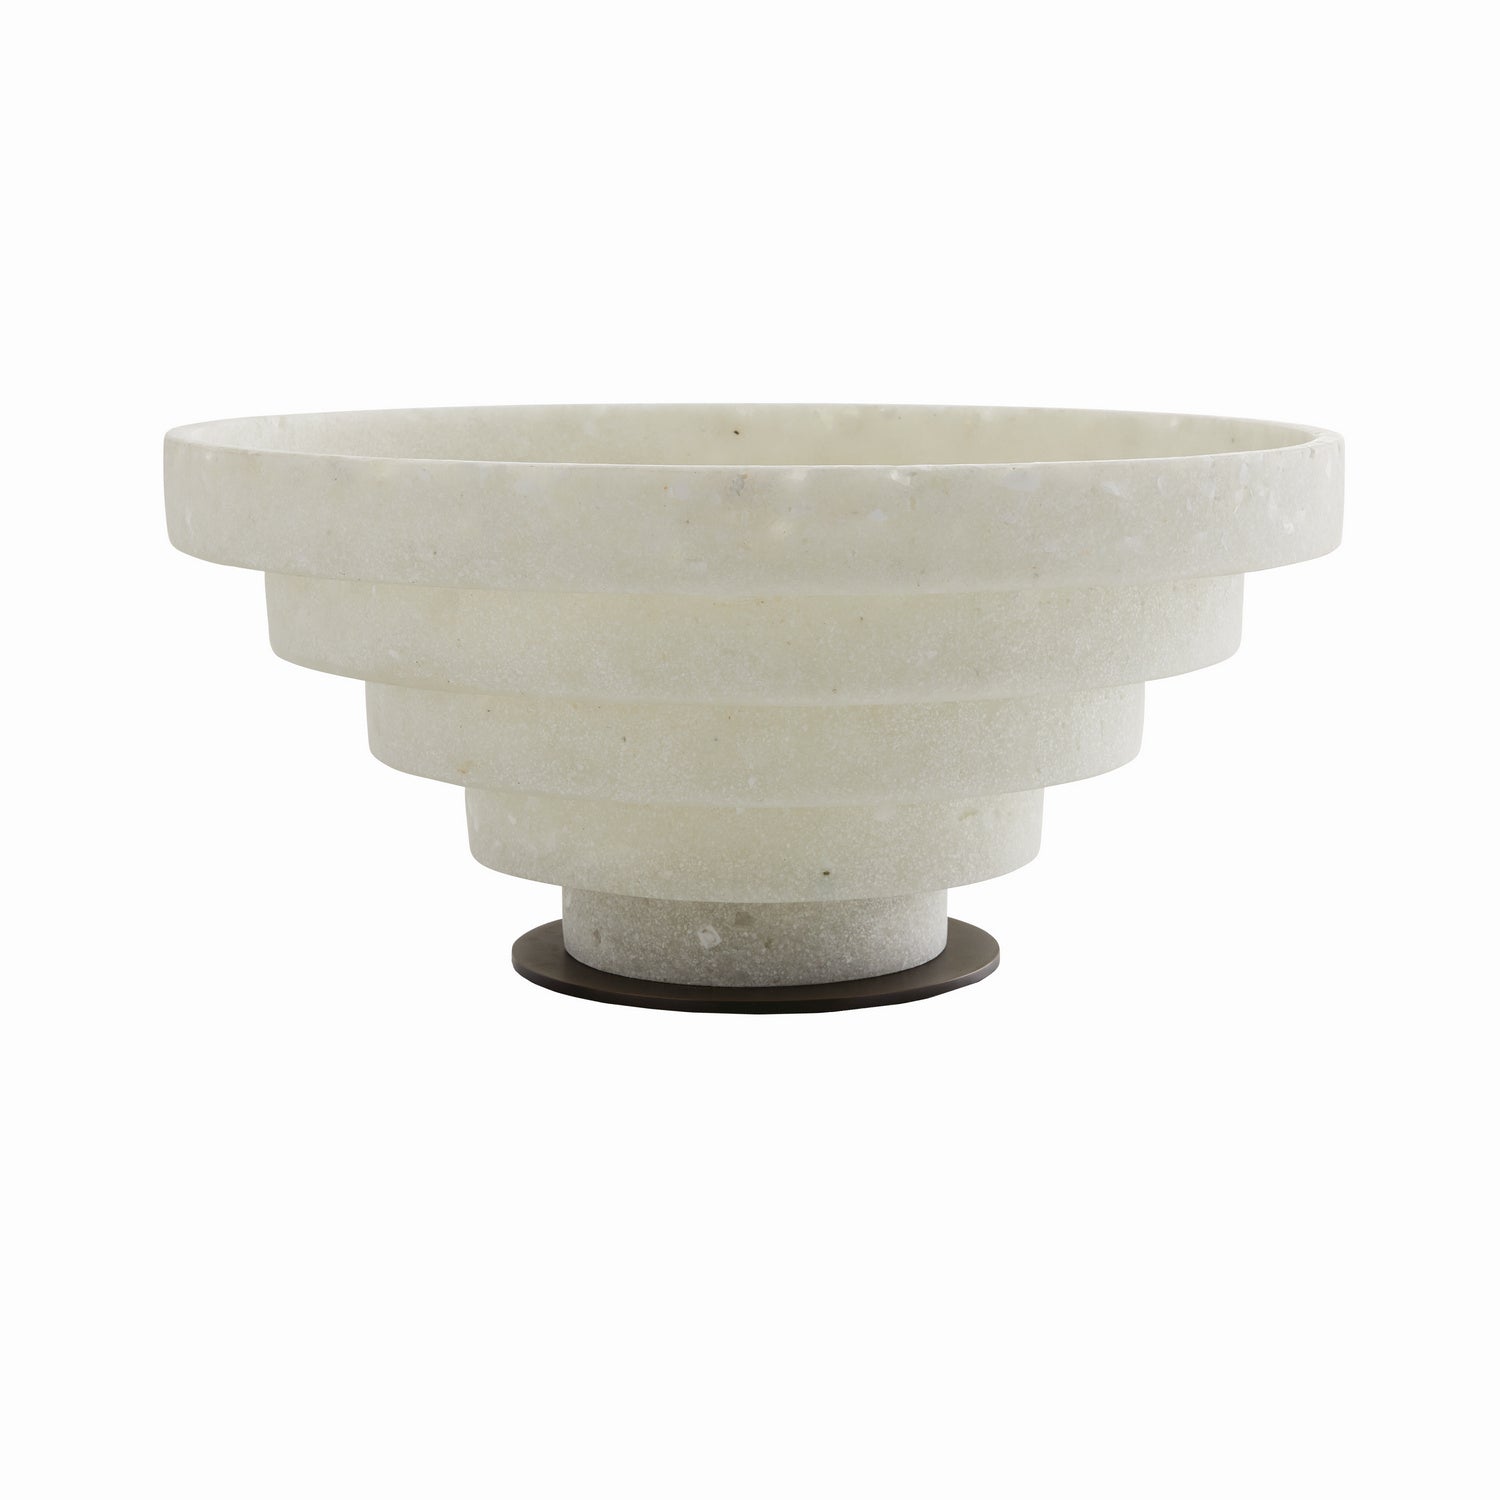 Centerpiece from the Maximus collection in Ivory finish